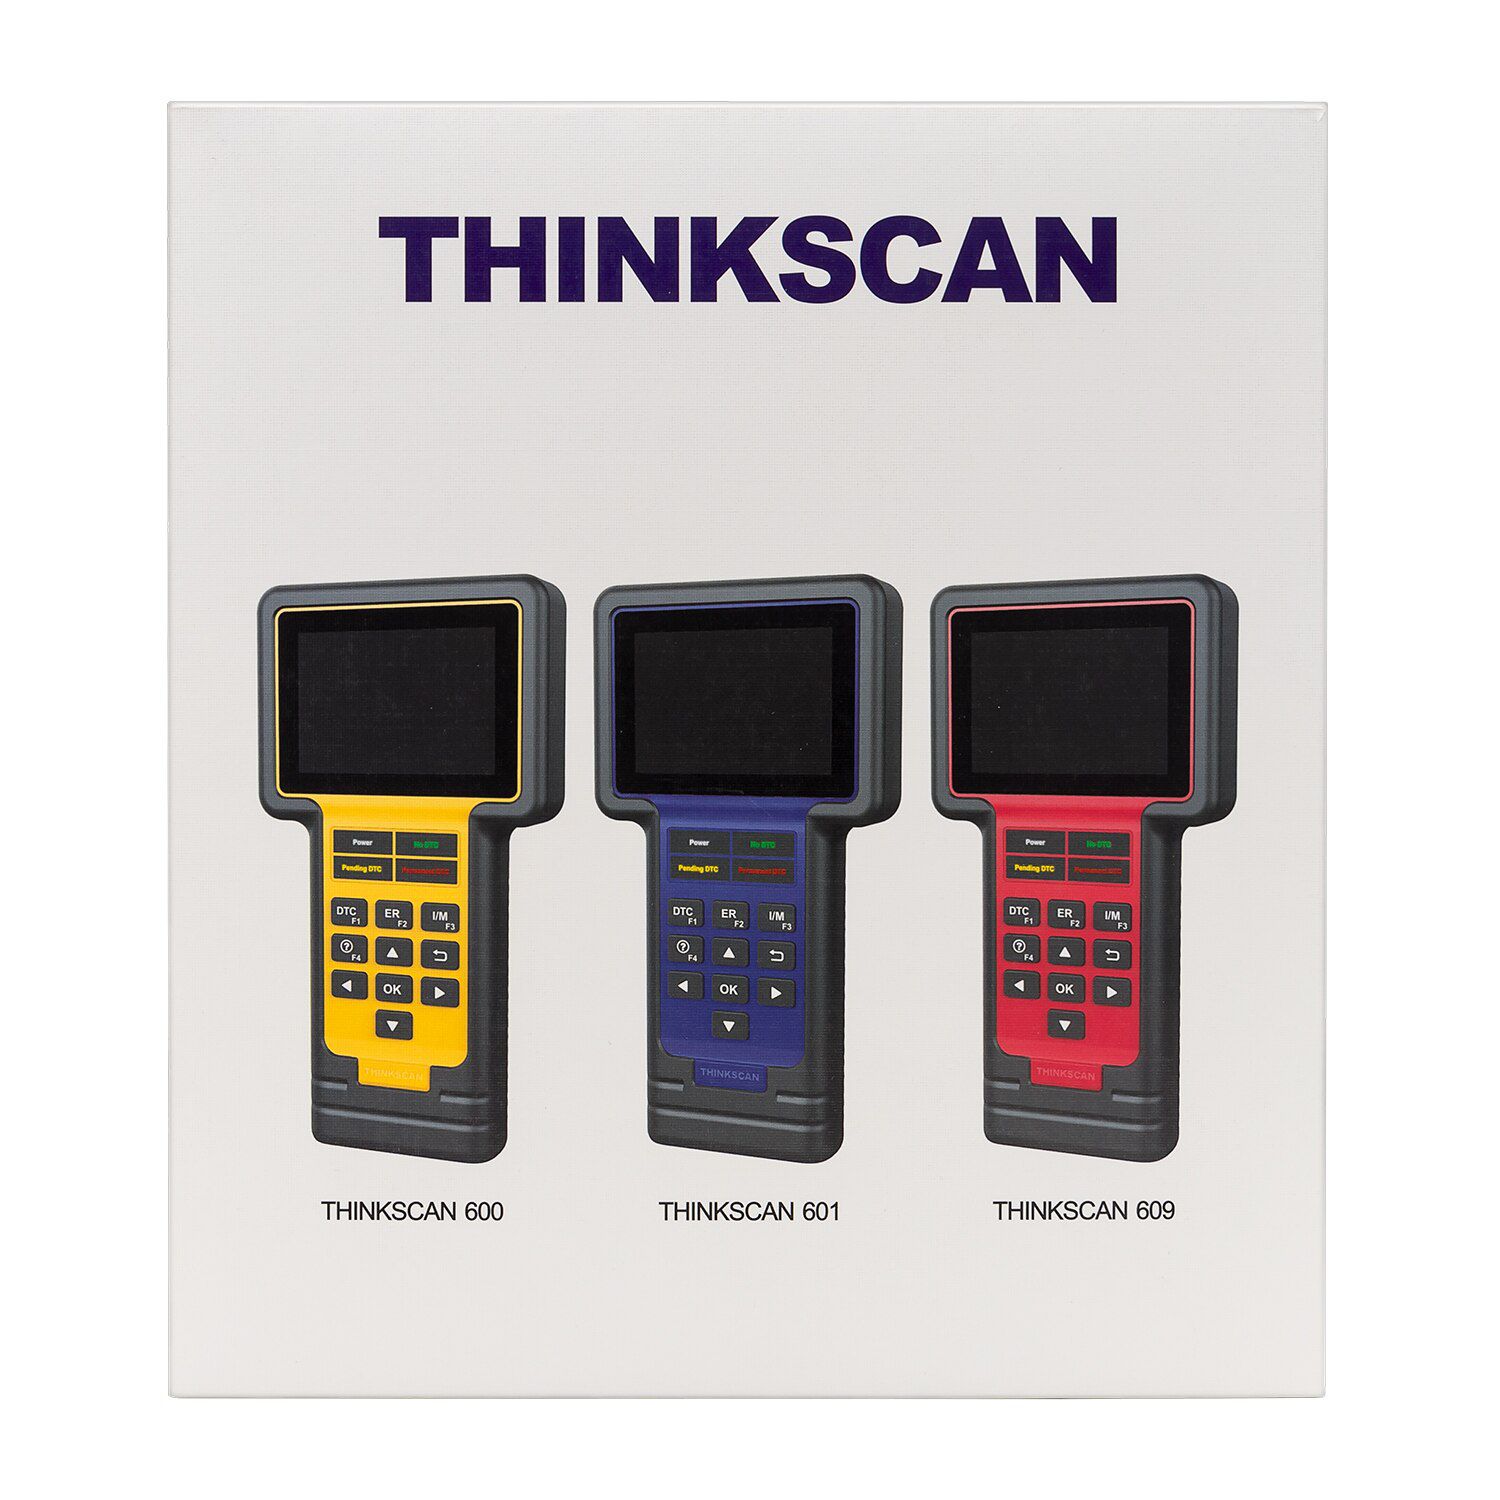 Thinkcar Thinkscan 600 ABS/SRS OBD2 Scanner